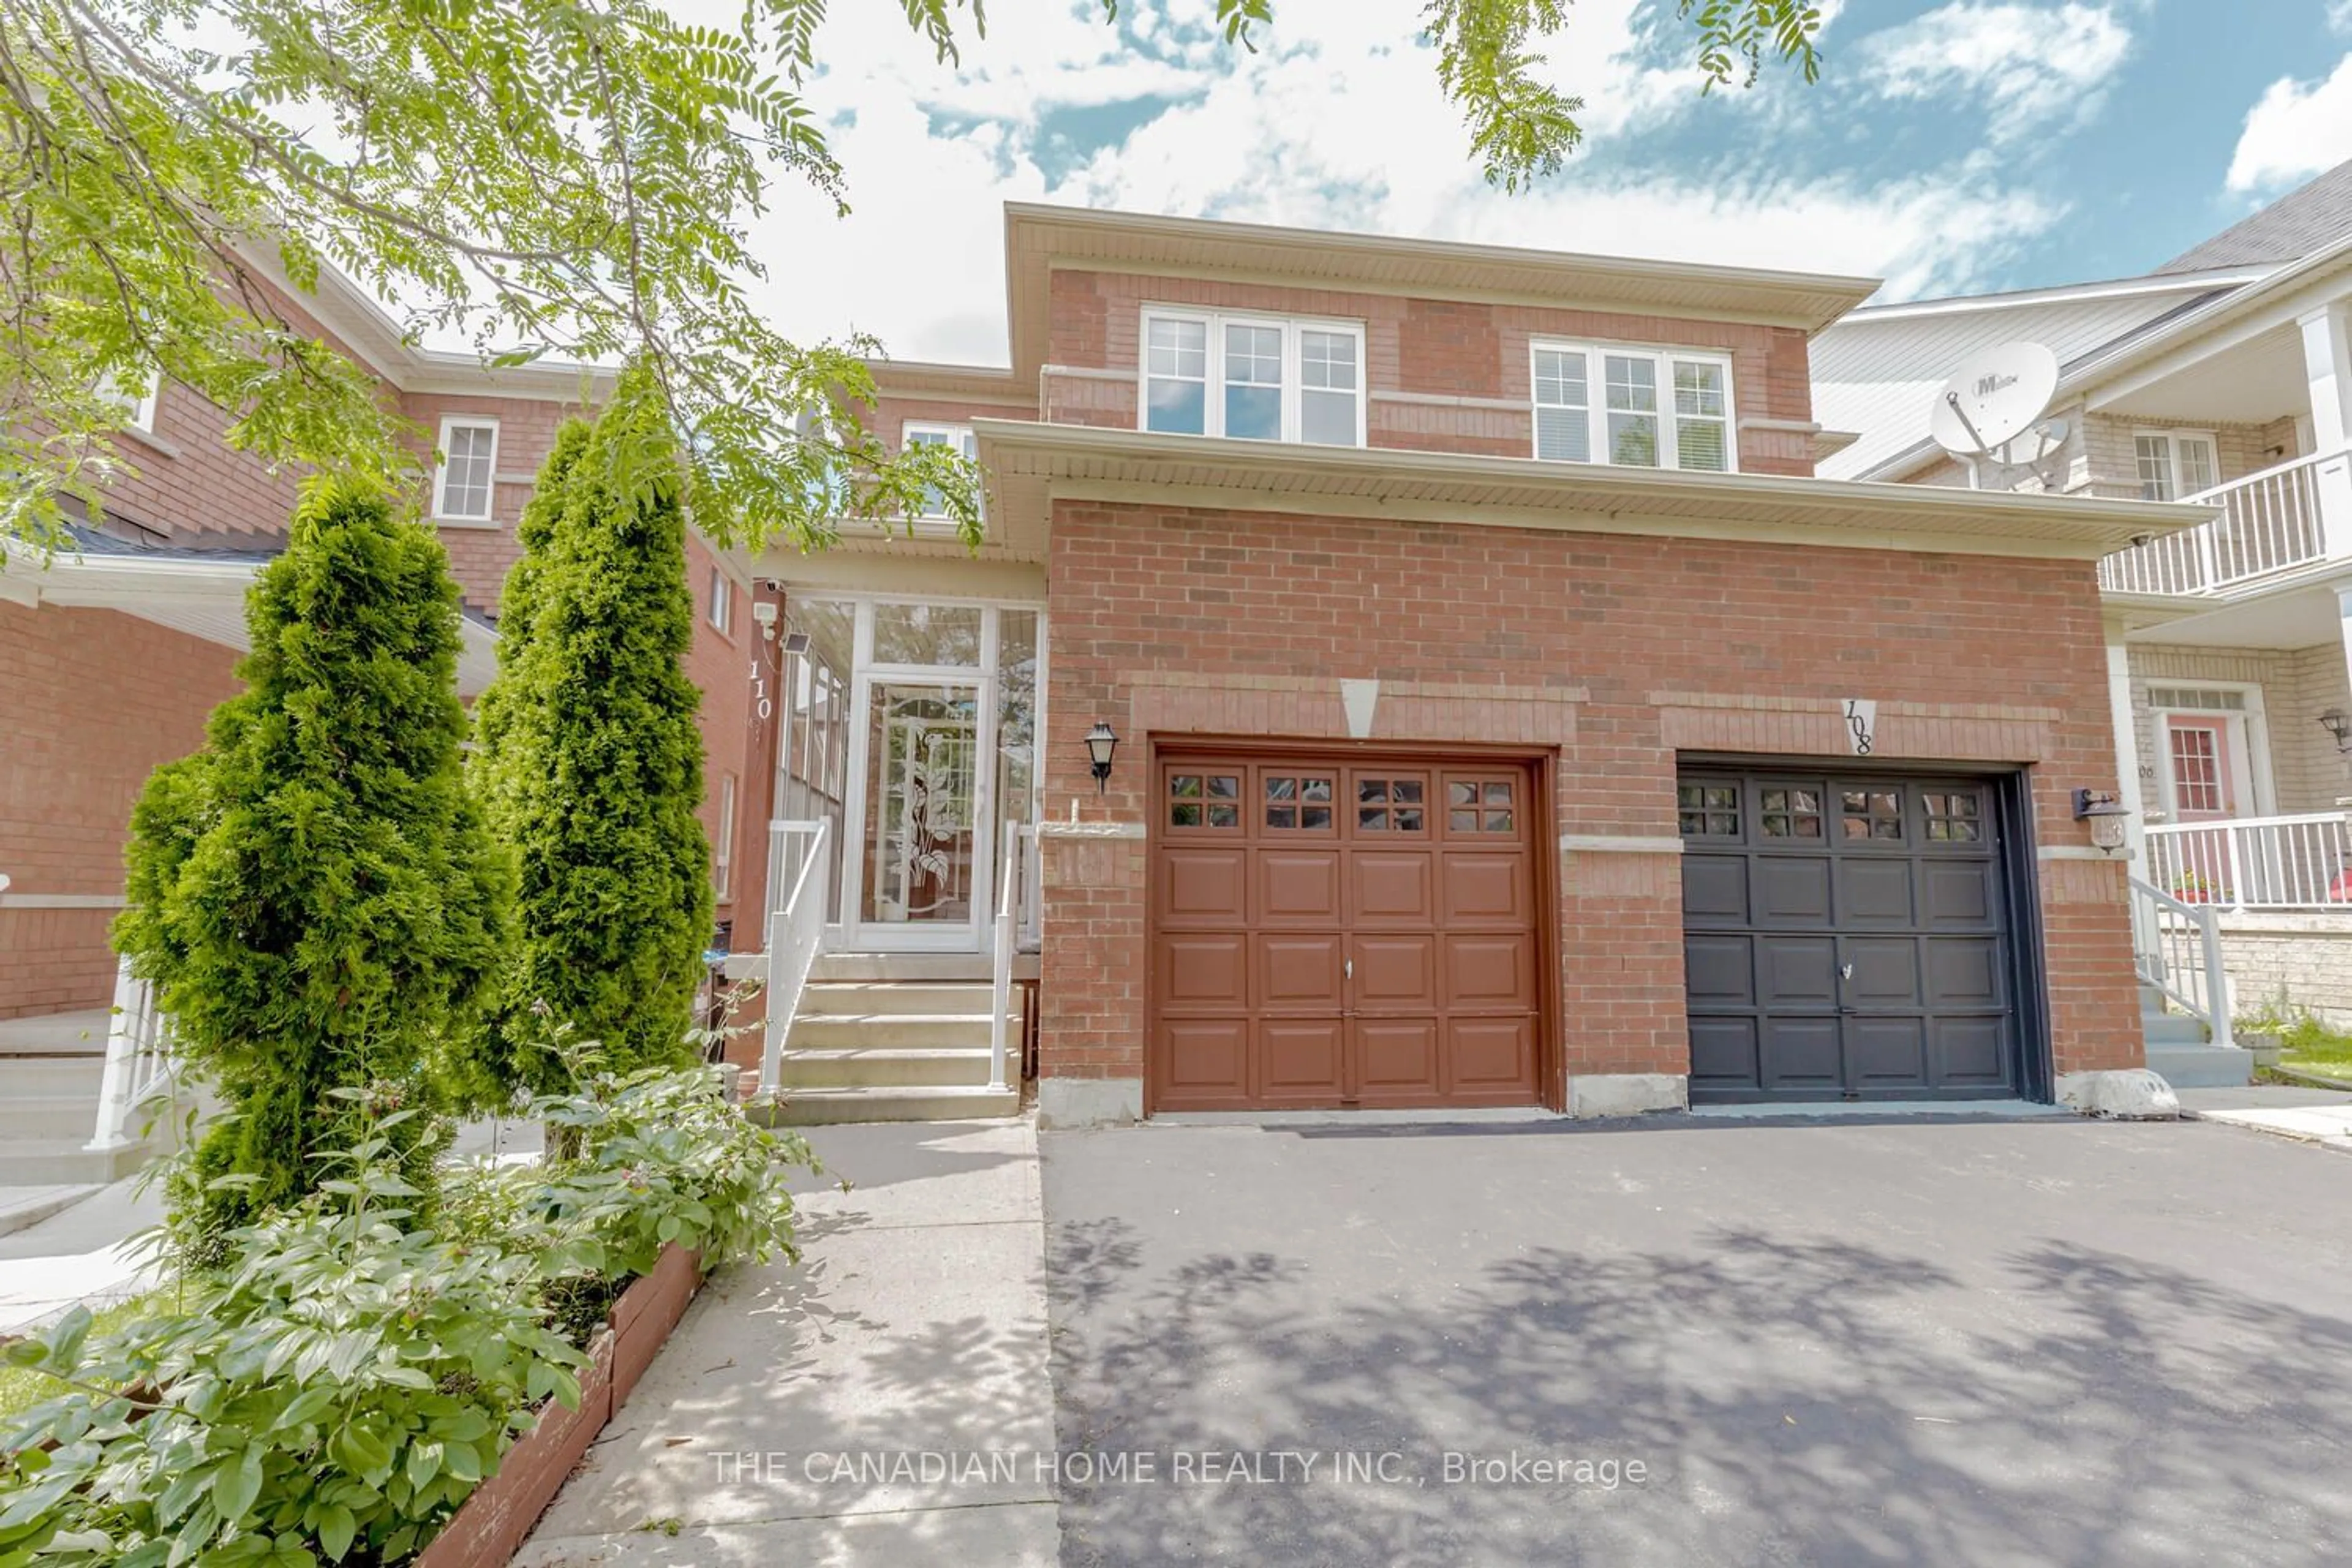 Home with brick exterior material for 110 NATHANIEL Cres, Brampton Ontario L6Y 5M3